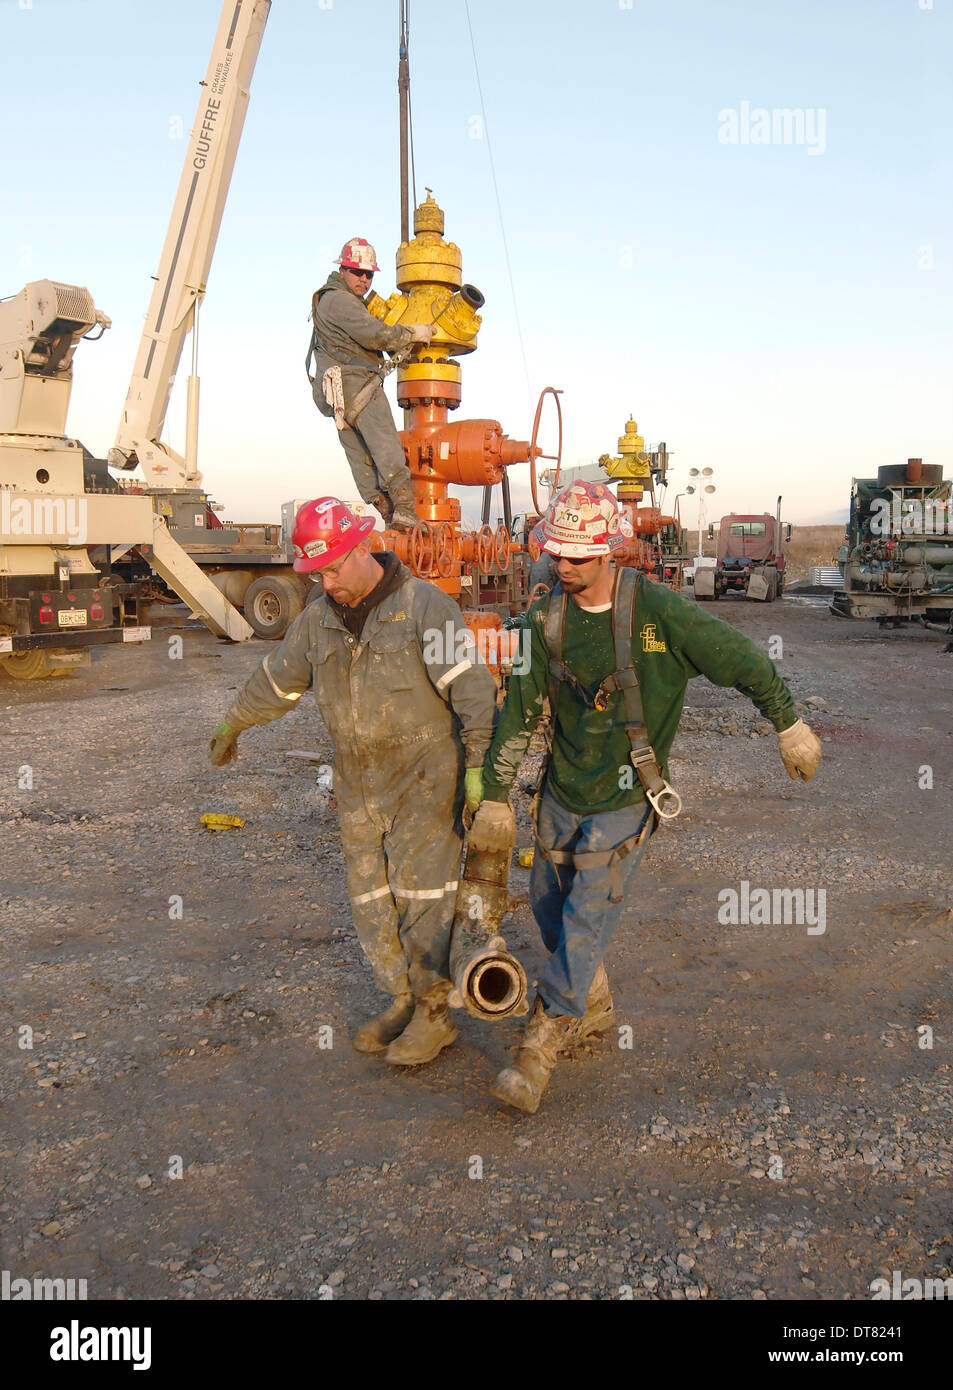 Two workers to carry a heavy fitting to attach pipe to well-head as they prepare to frack the well. Stock Photo